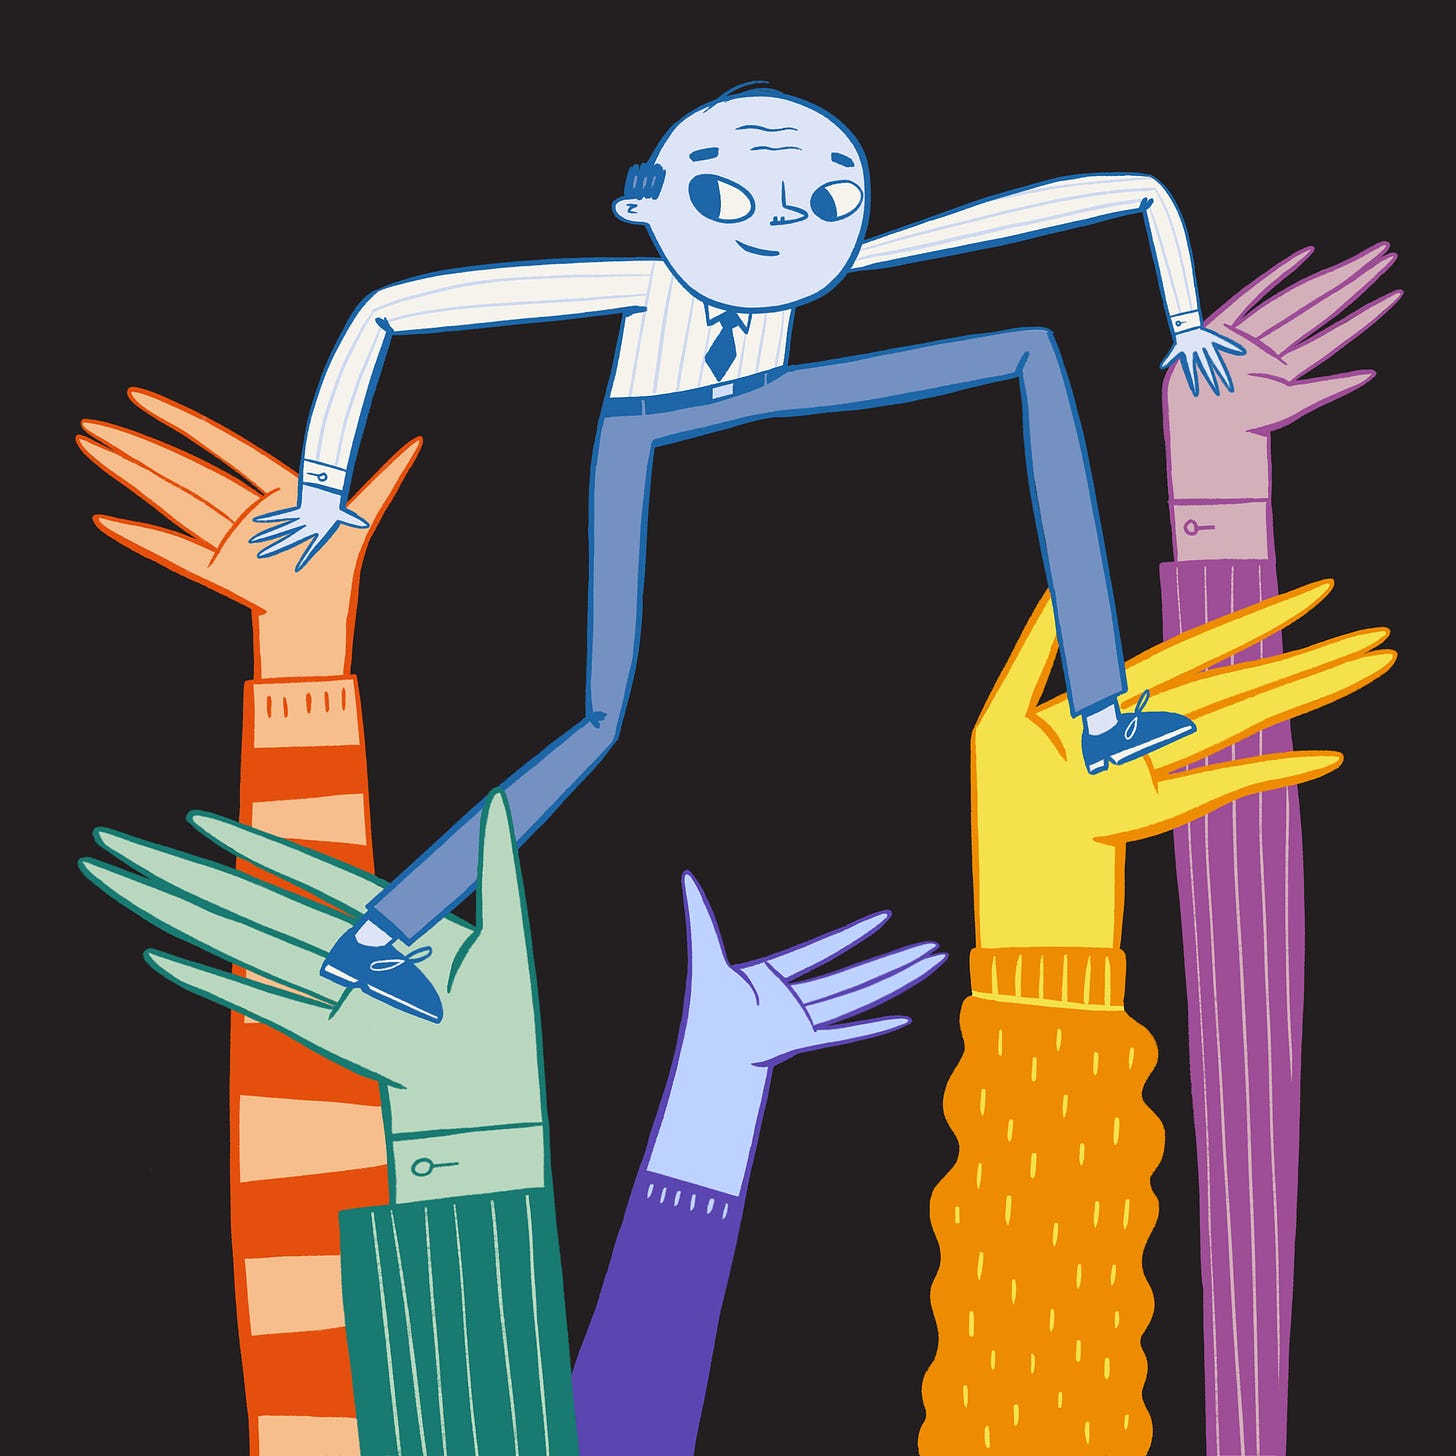 A man is being held up by the arms of 5 different people. He is balancing but has a smile on his face.